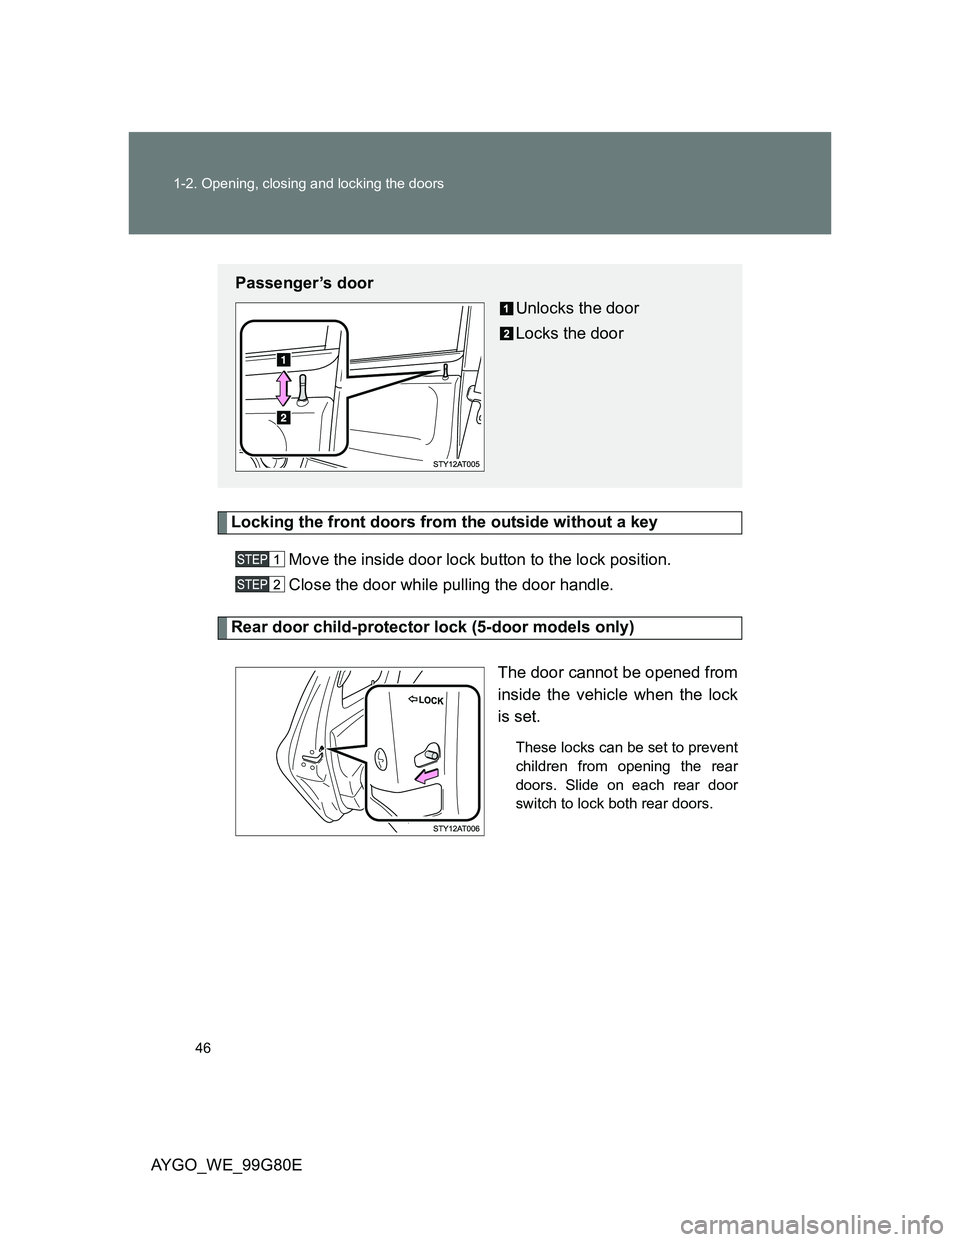 TOYOTA AYGO 2014  Owners Manual (in English) 46 1-2. Opening, closing and locking the doors
AYGO_WE_99G80E
Locking the front doors from the outside without a key
Move the inside door lock button to the lock position.
Close the door while pulling